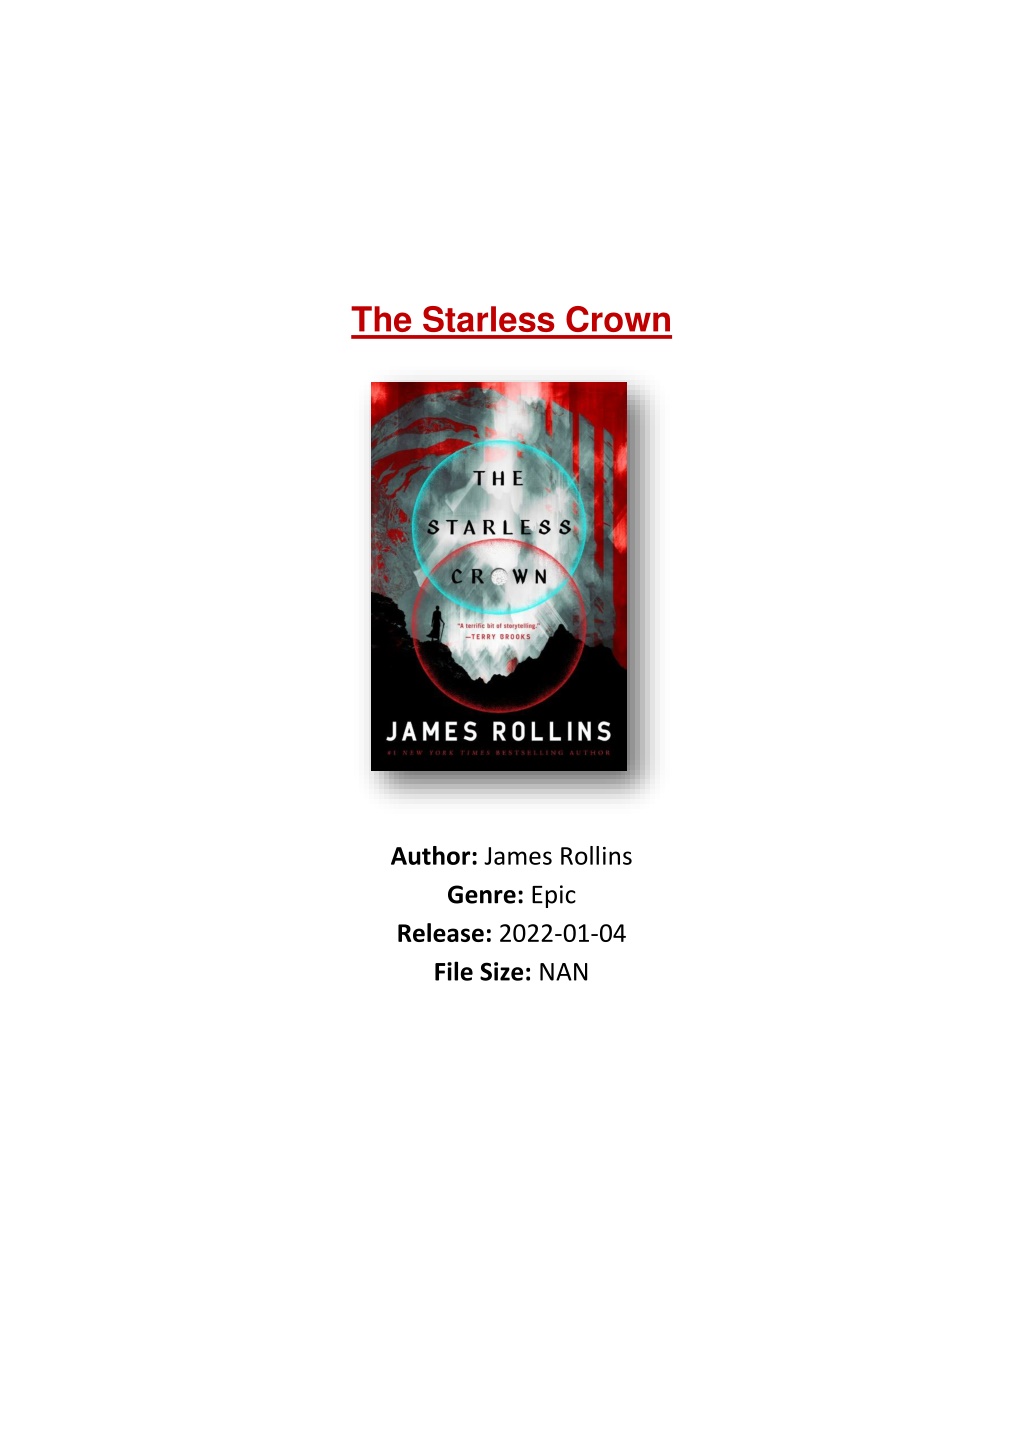 james rollins the starless crown review